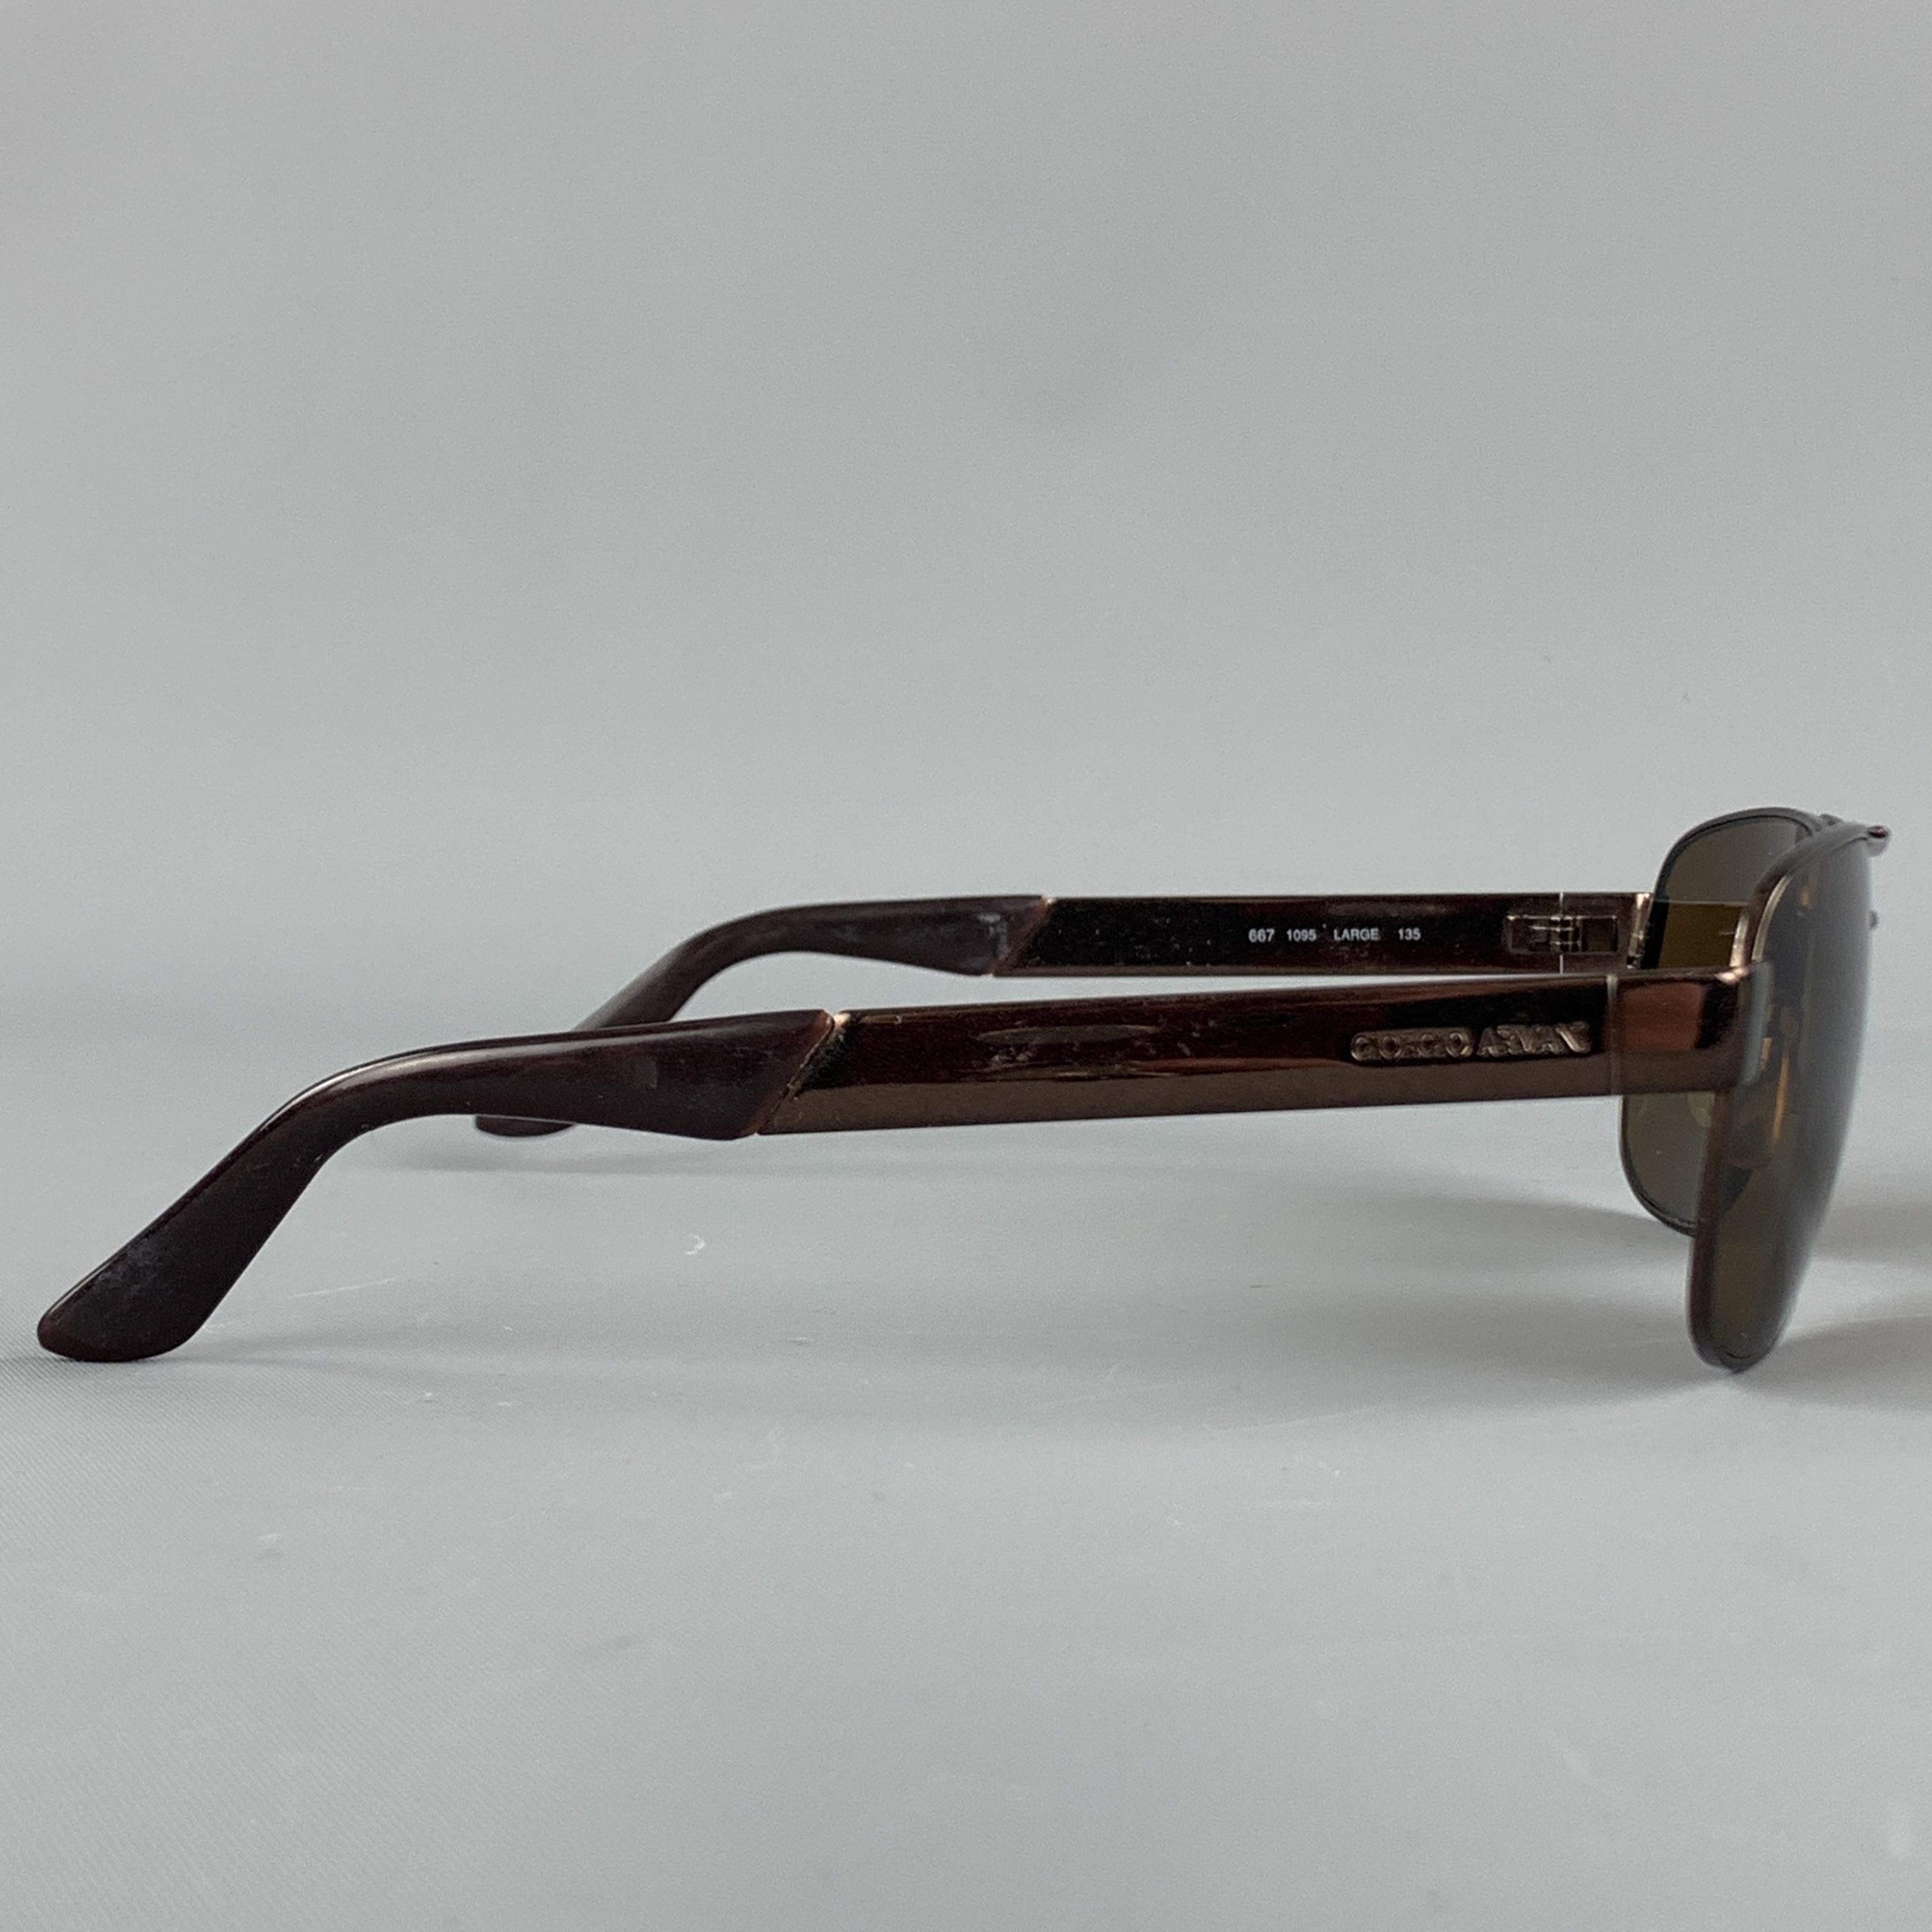 GIORGIO ARMANI sunglasses come in a deep bronze tone metal with square aviator shaped lenses. Made in Italy.

Excellent Pre-Owned Condition.
Marked: LARGE 135

Measurements:

Length: 14 cm.
Height: 4.5 cm.